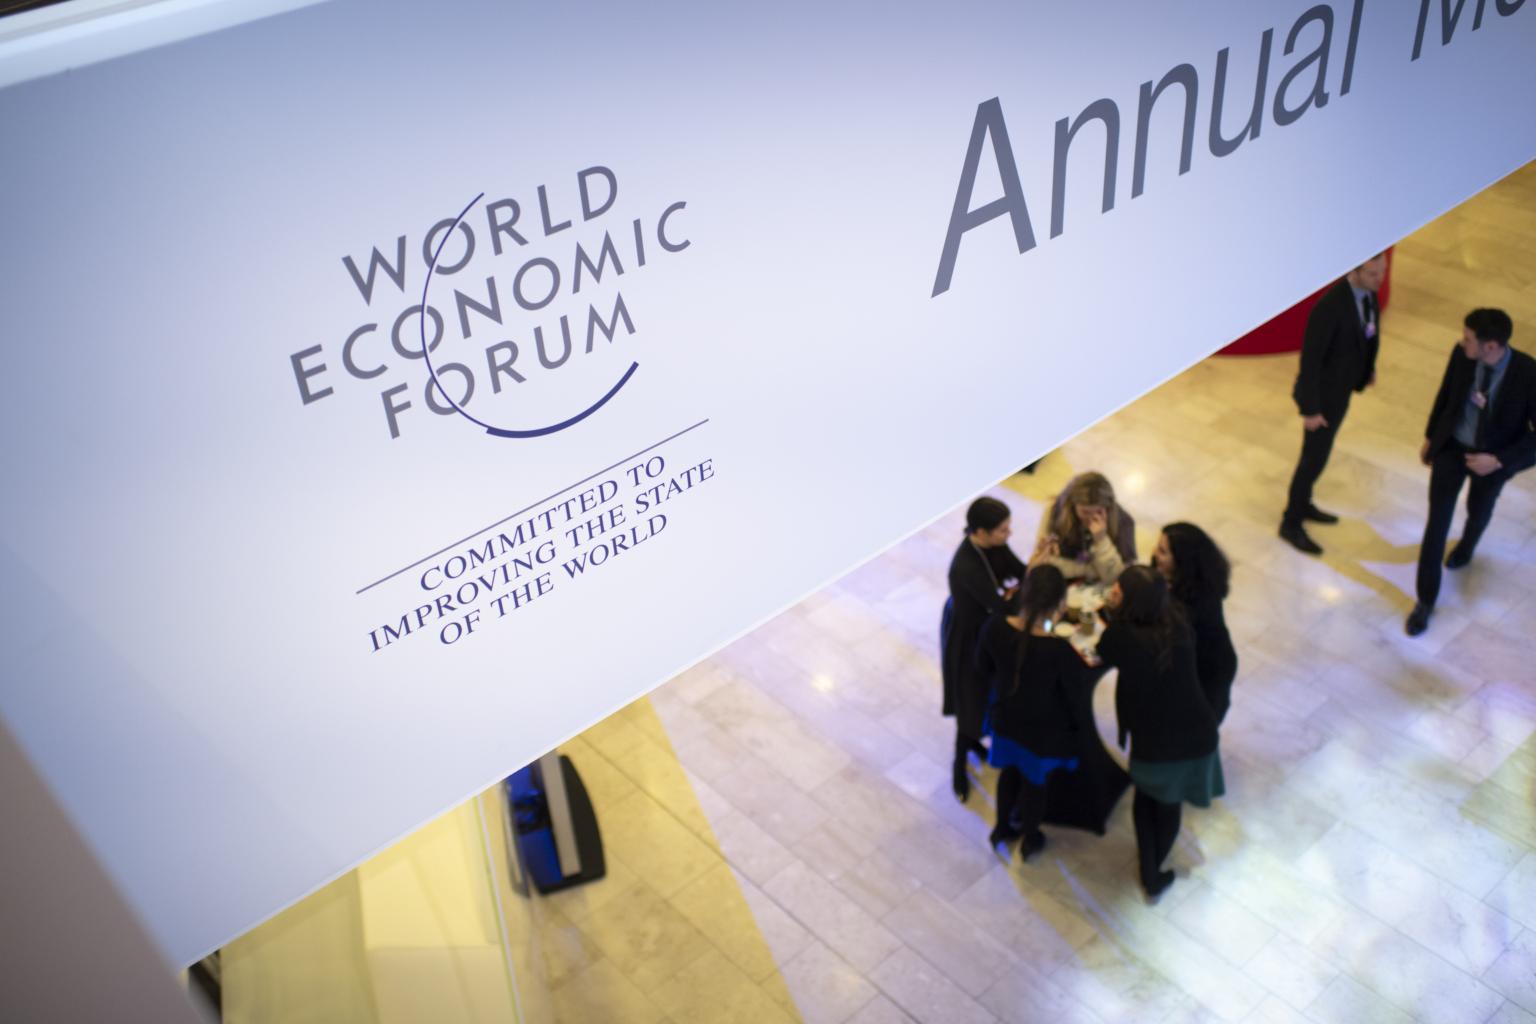 Two sessions of the World Economic Forum will be devoted to cryptocurrency